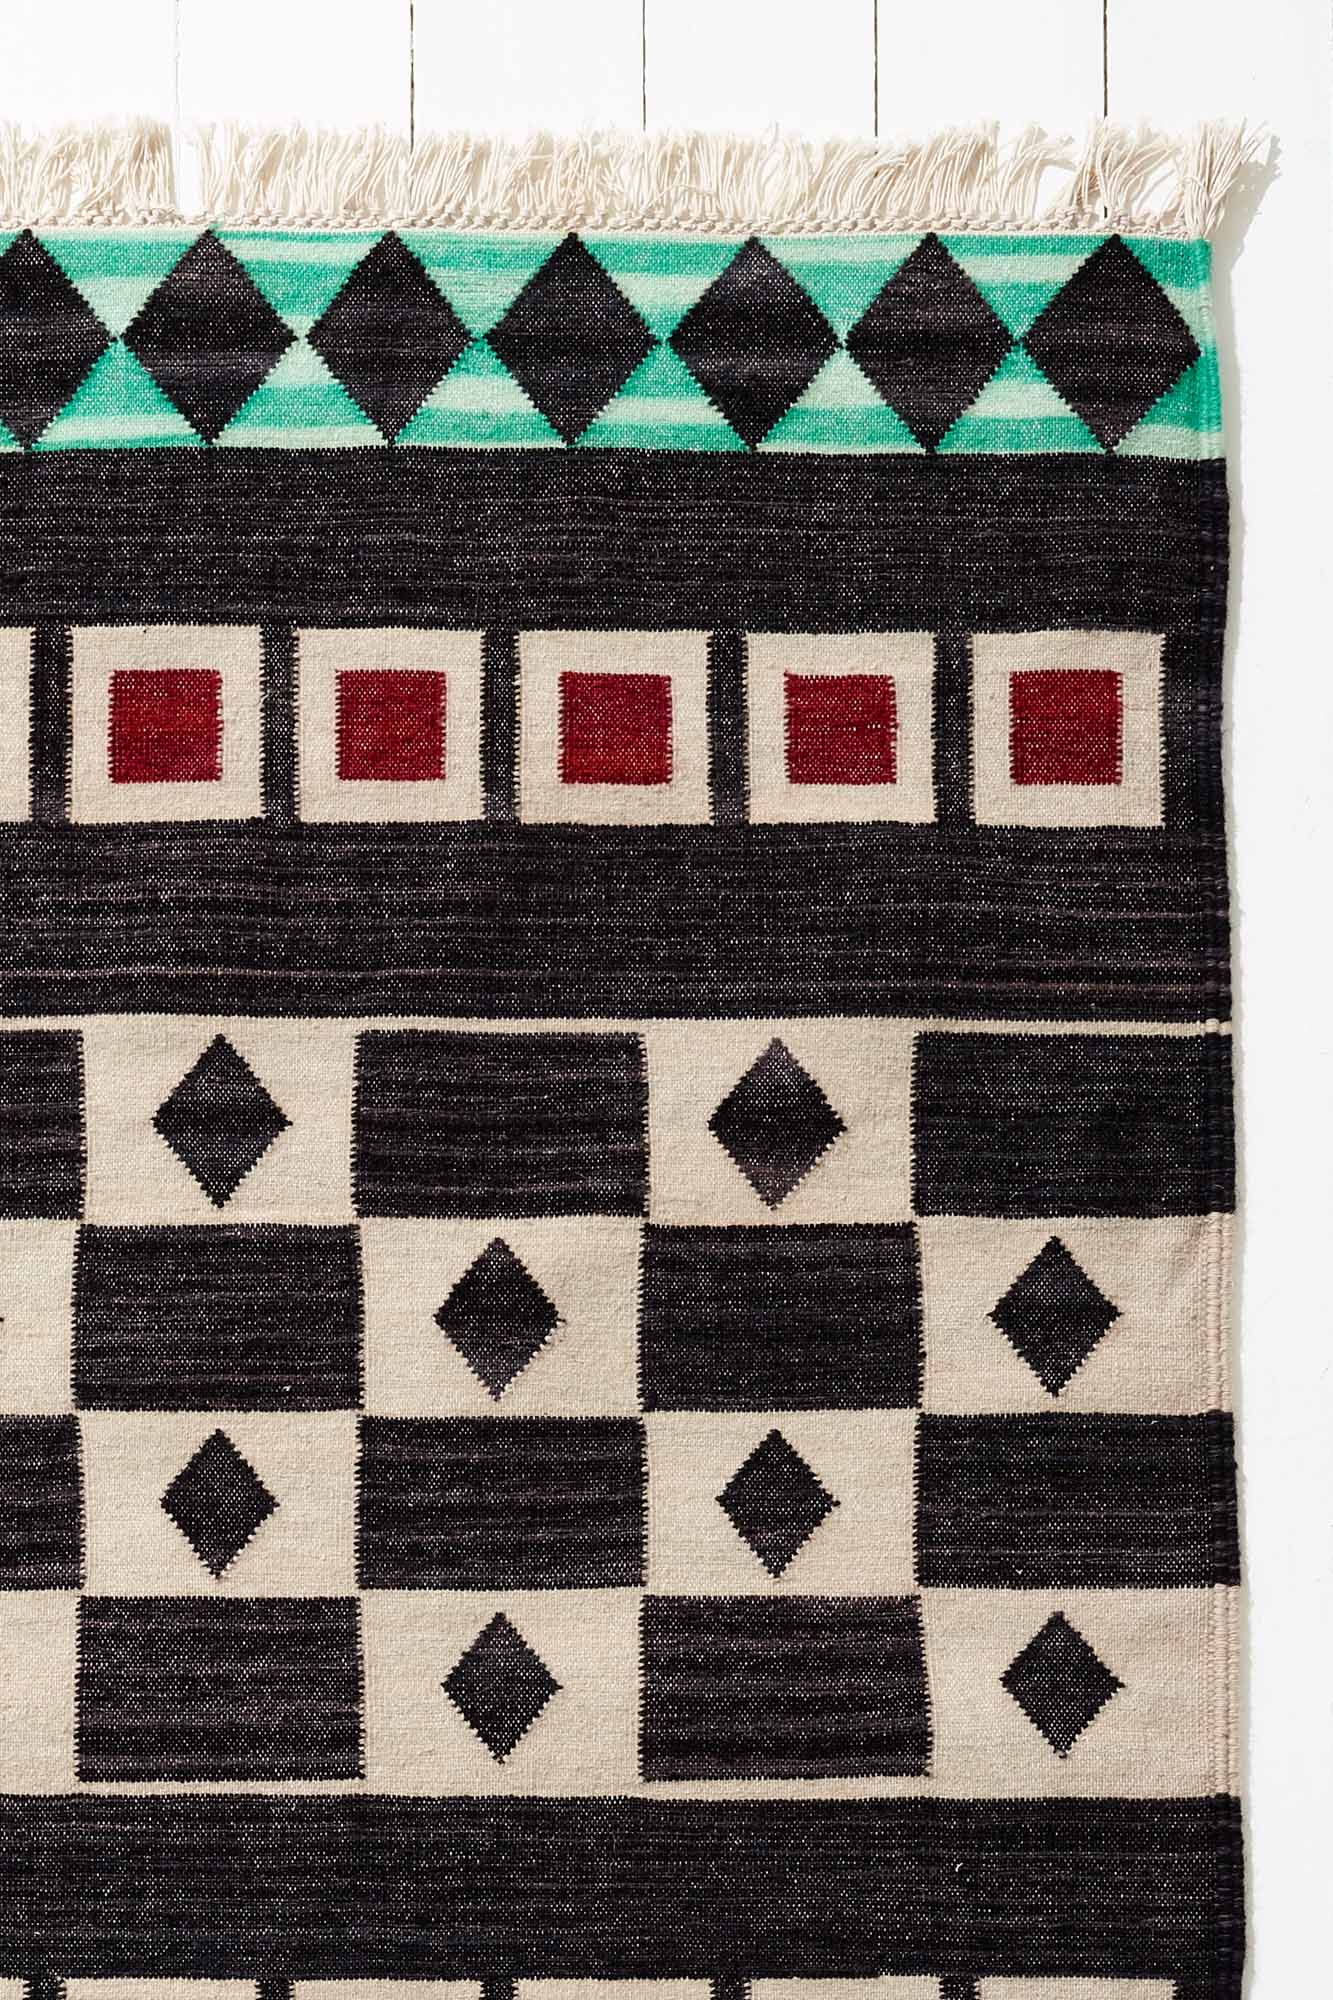 Wool Rug in Checker Board - Pre Order-Humphries and Begg